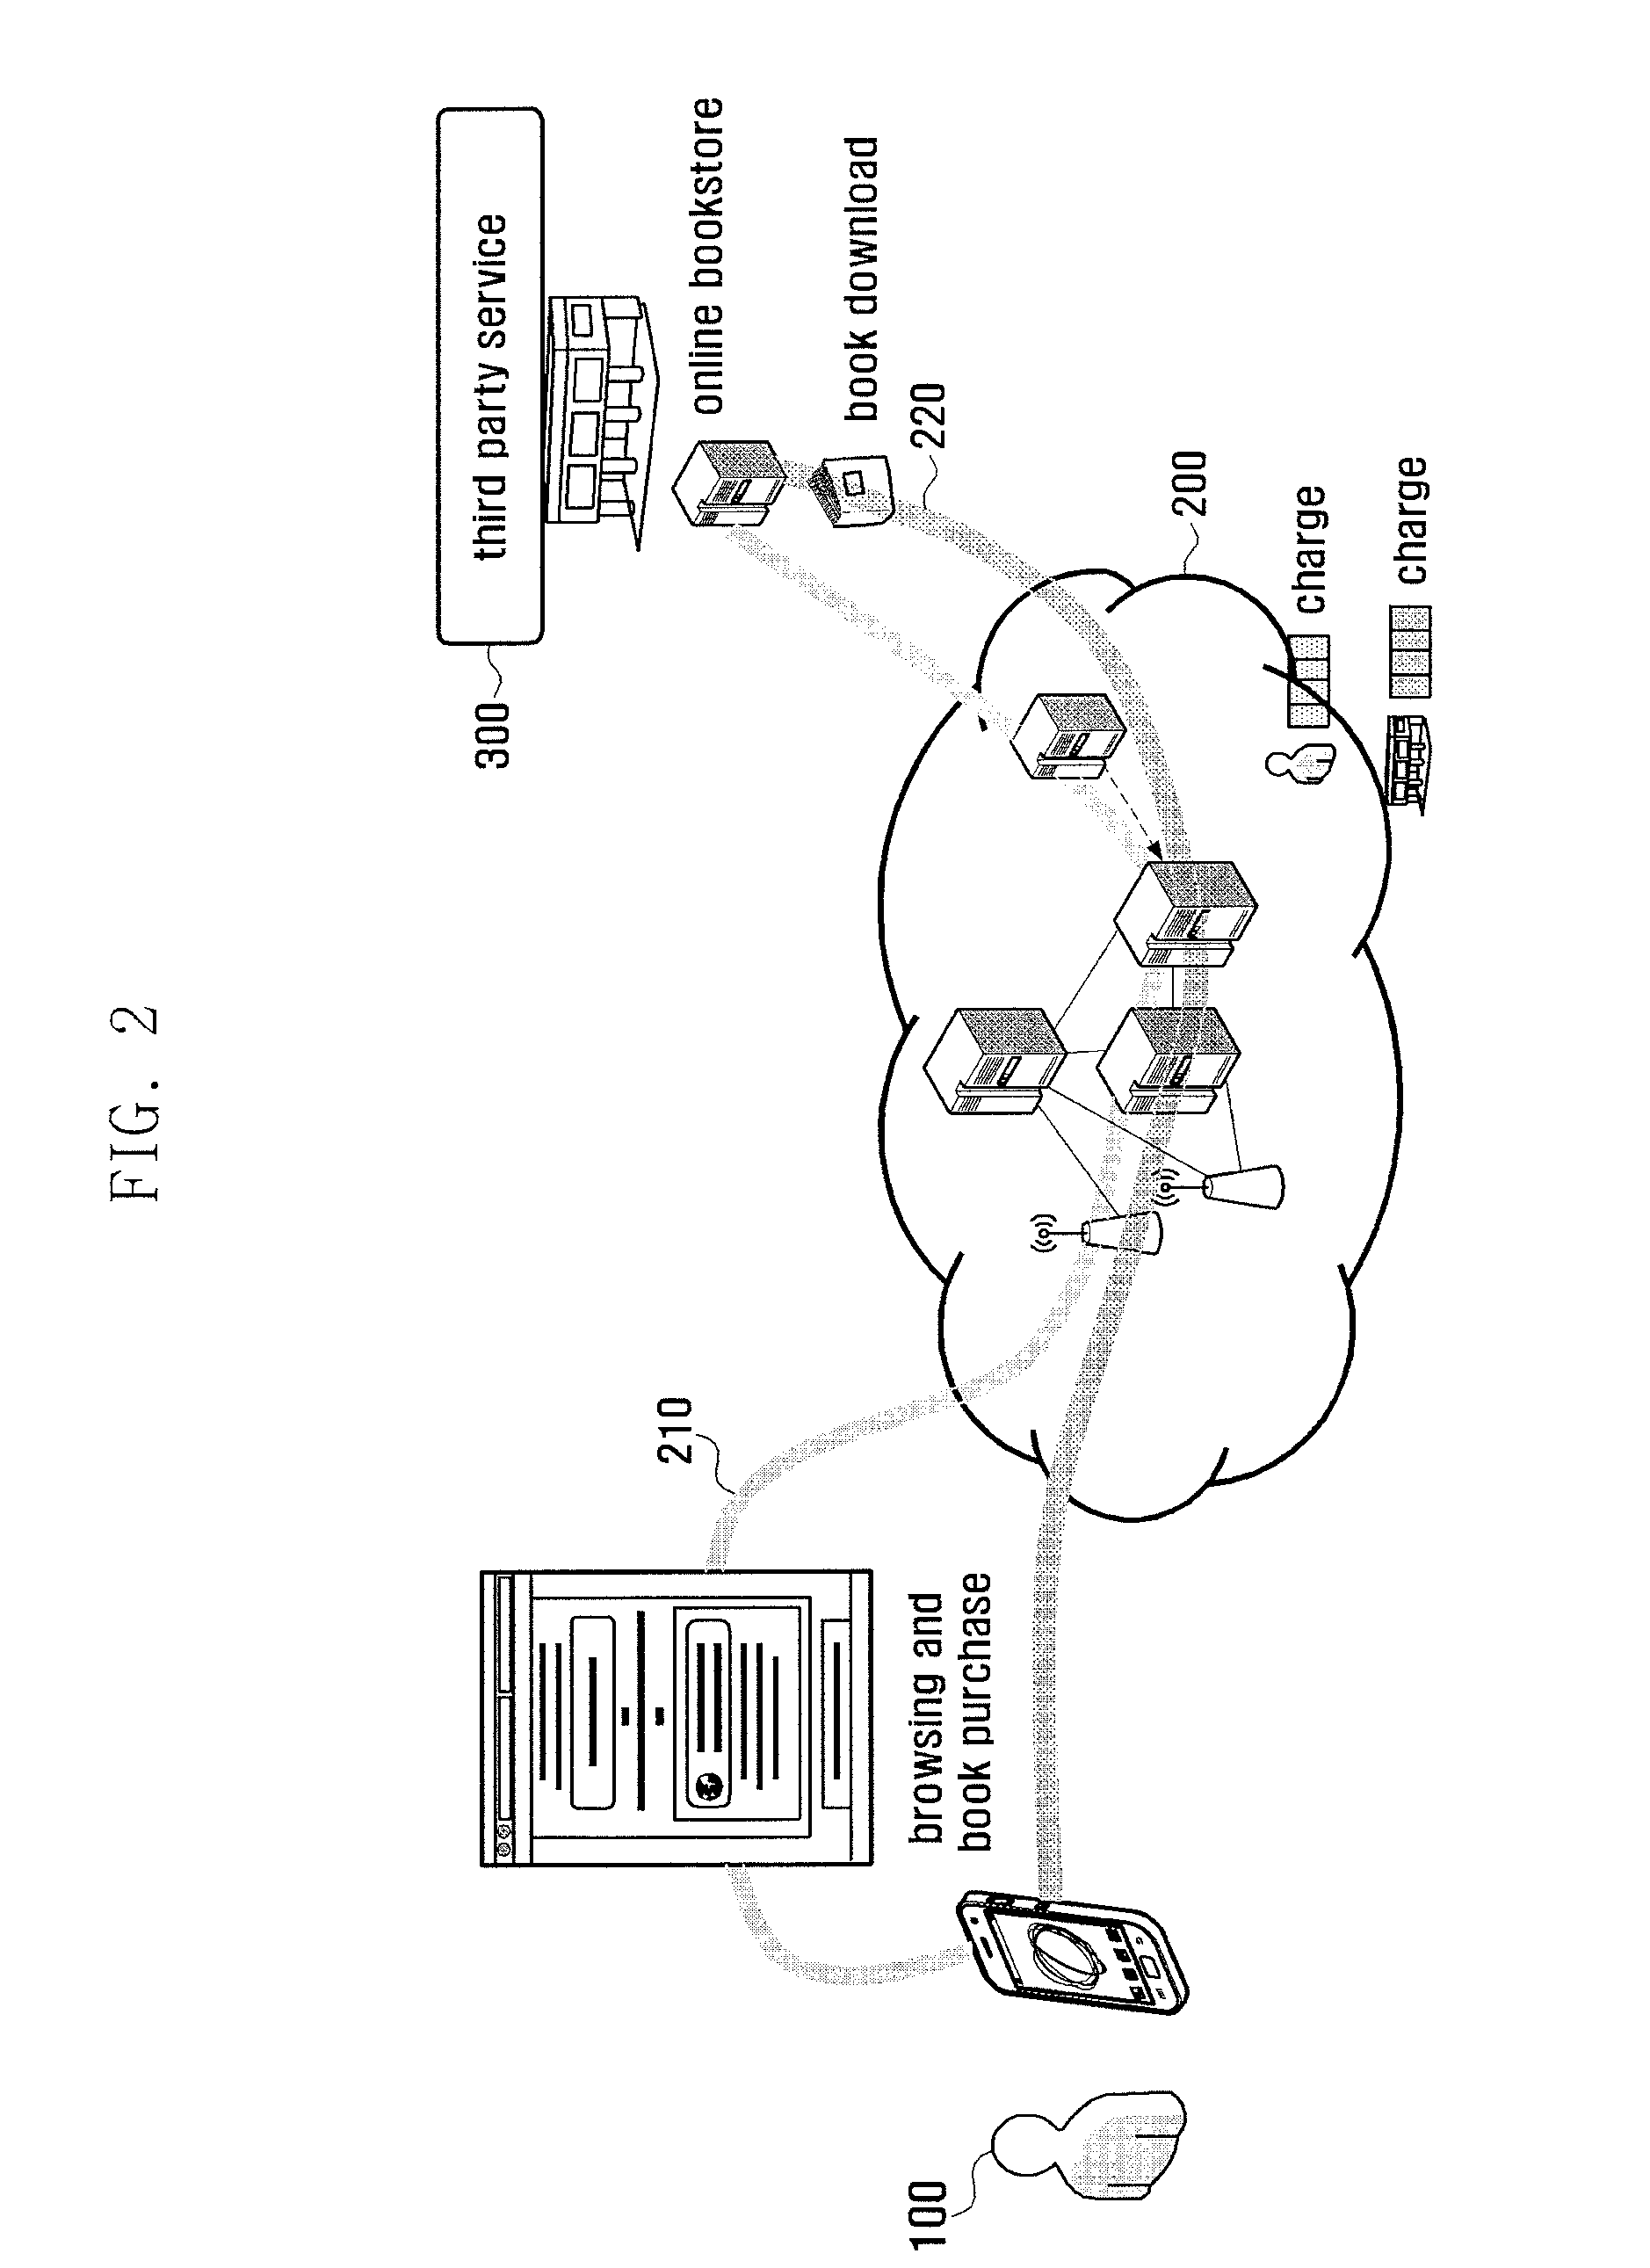 Device and method for controlling charging in a mobile communication system